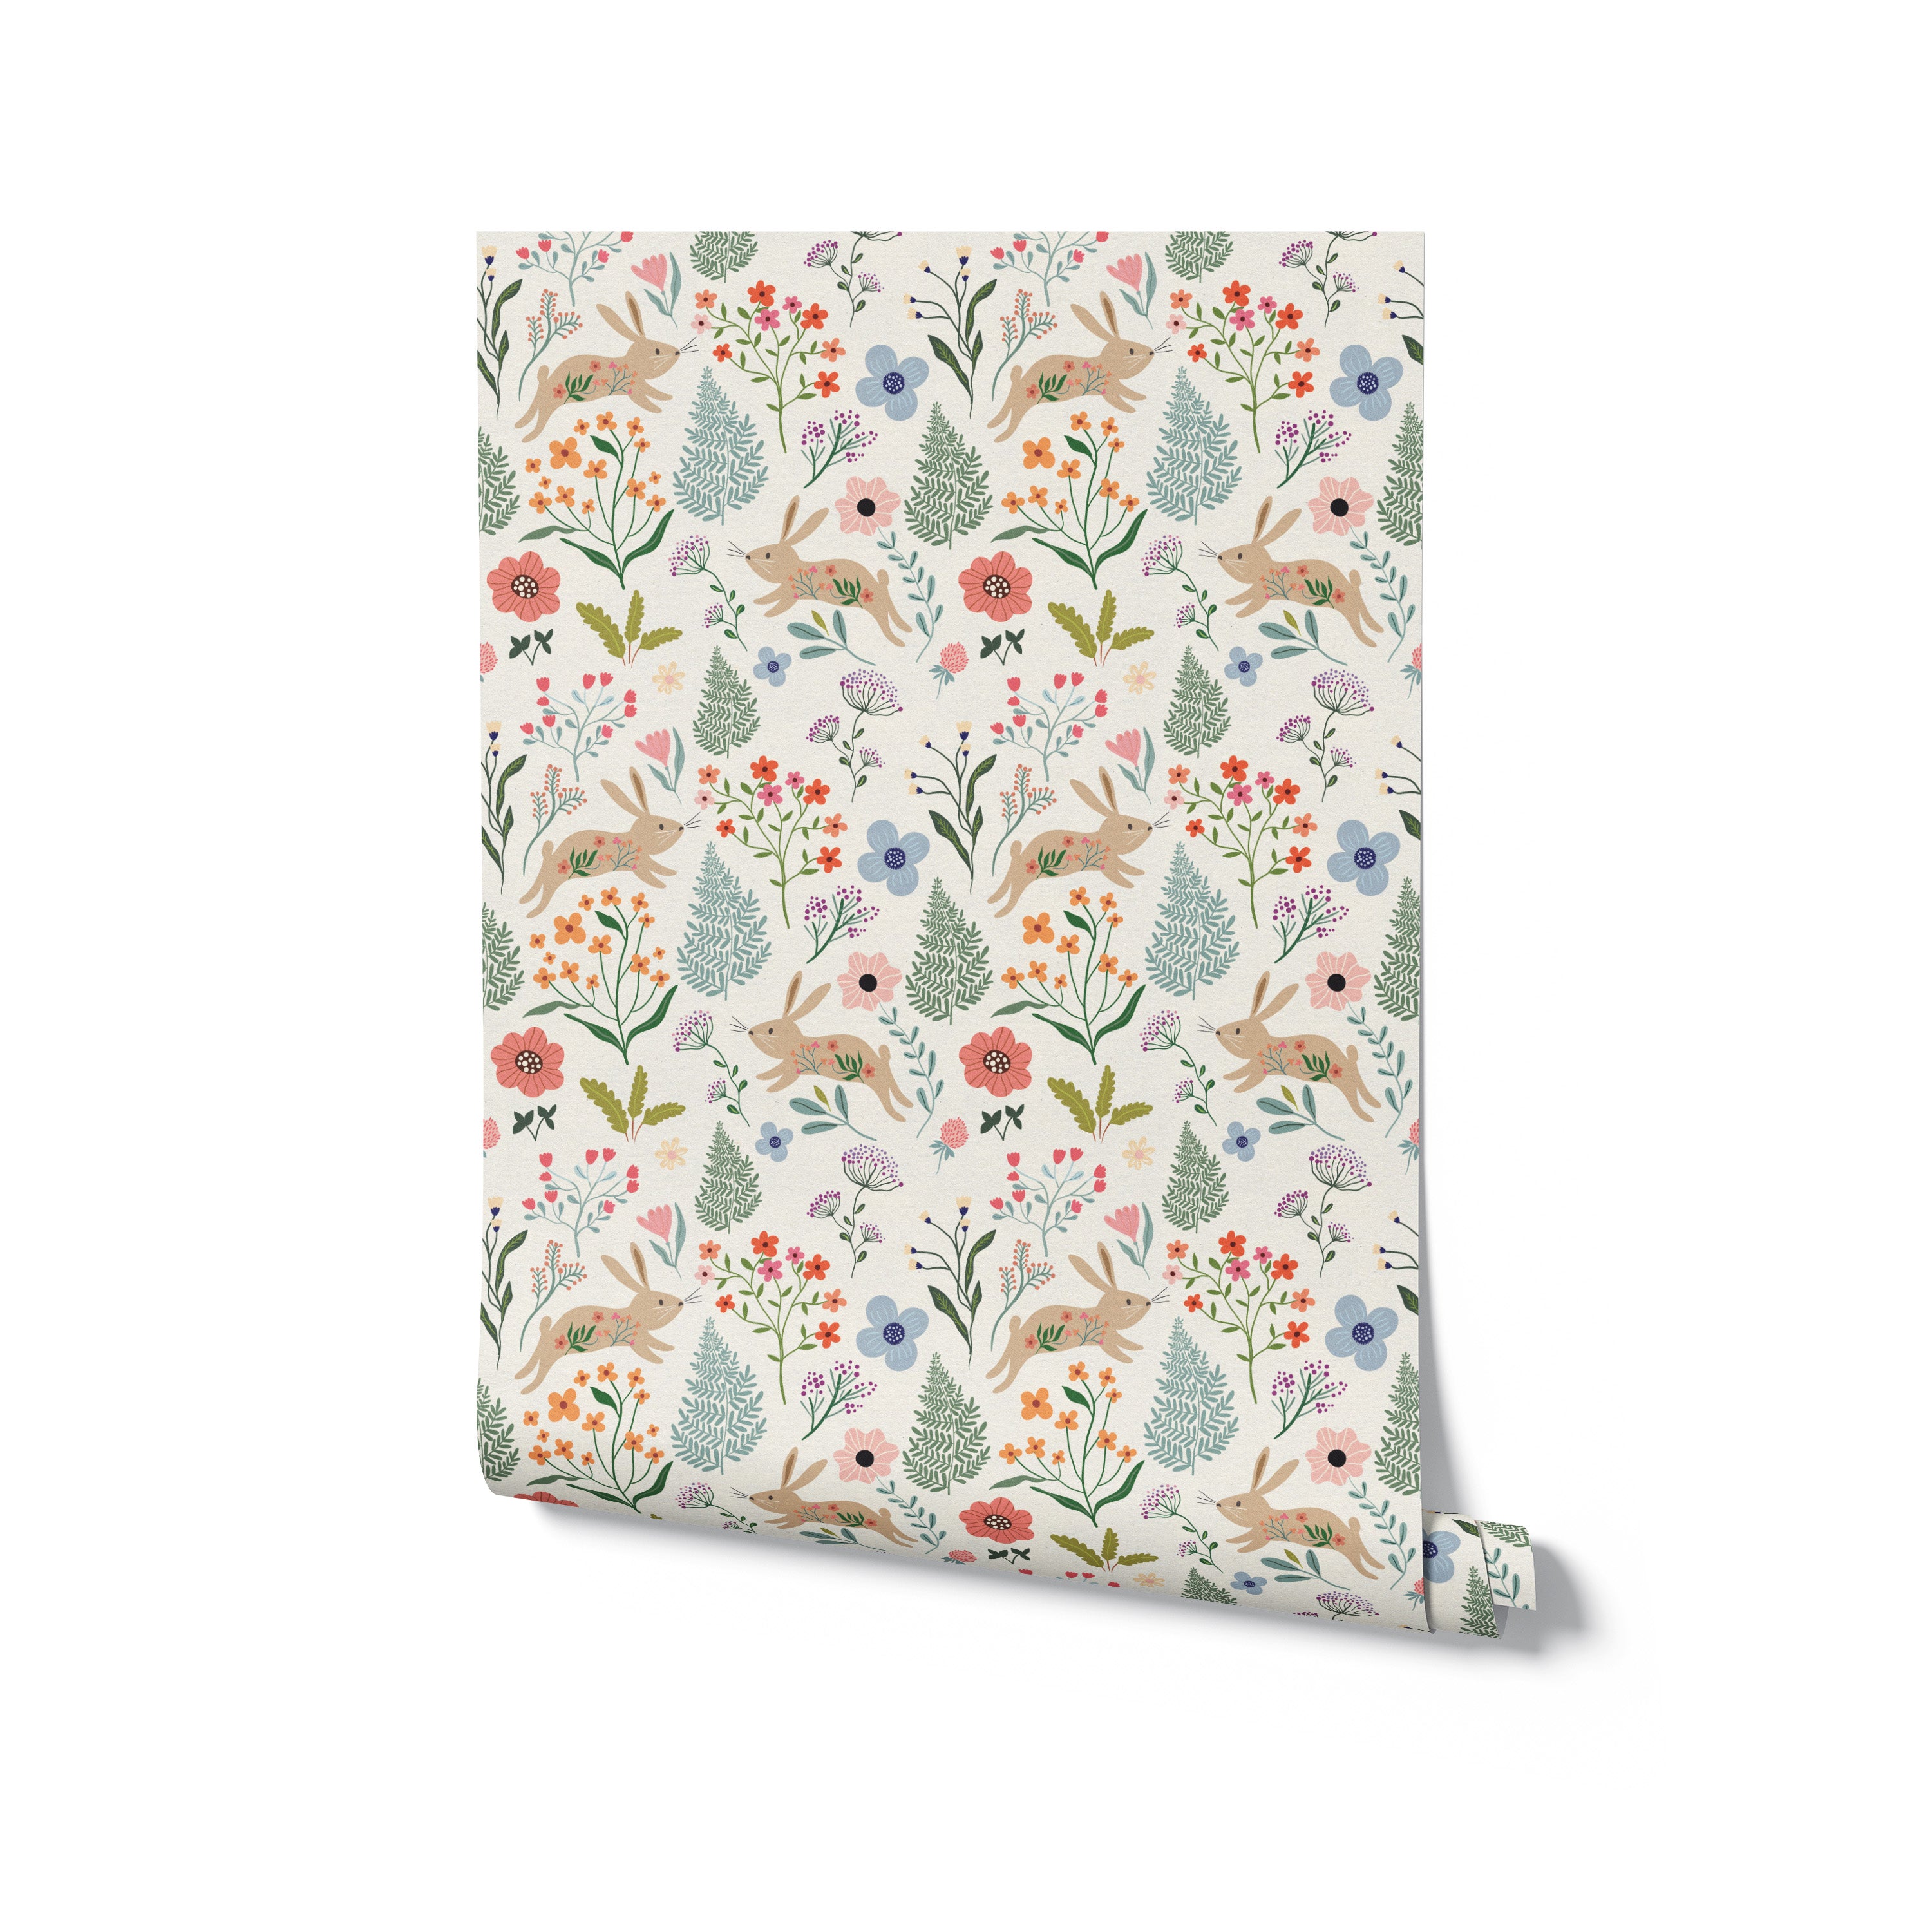 A digital image of a roll of Colourful Spring Bunnies Wallpaper, highlighting the adorable and detailed design of rabbits amid a colorful garden of flowers and plants, ideal for enriching a nursery or playroom with a joyful theme.